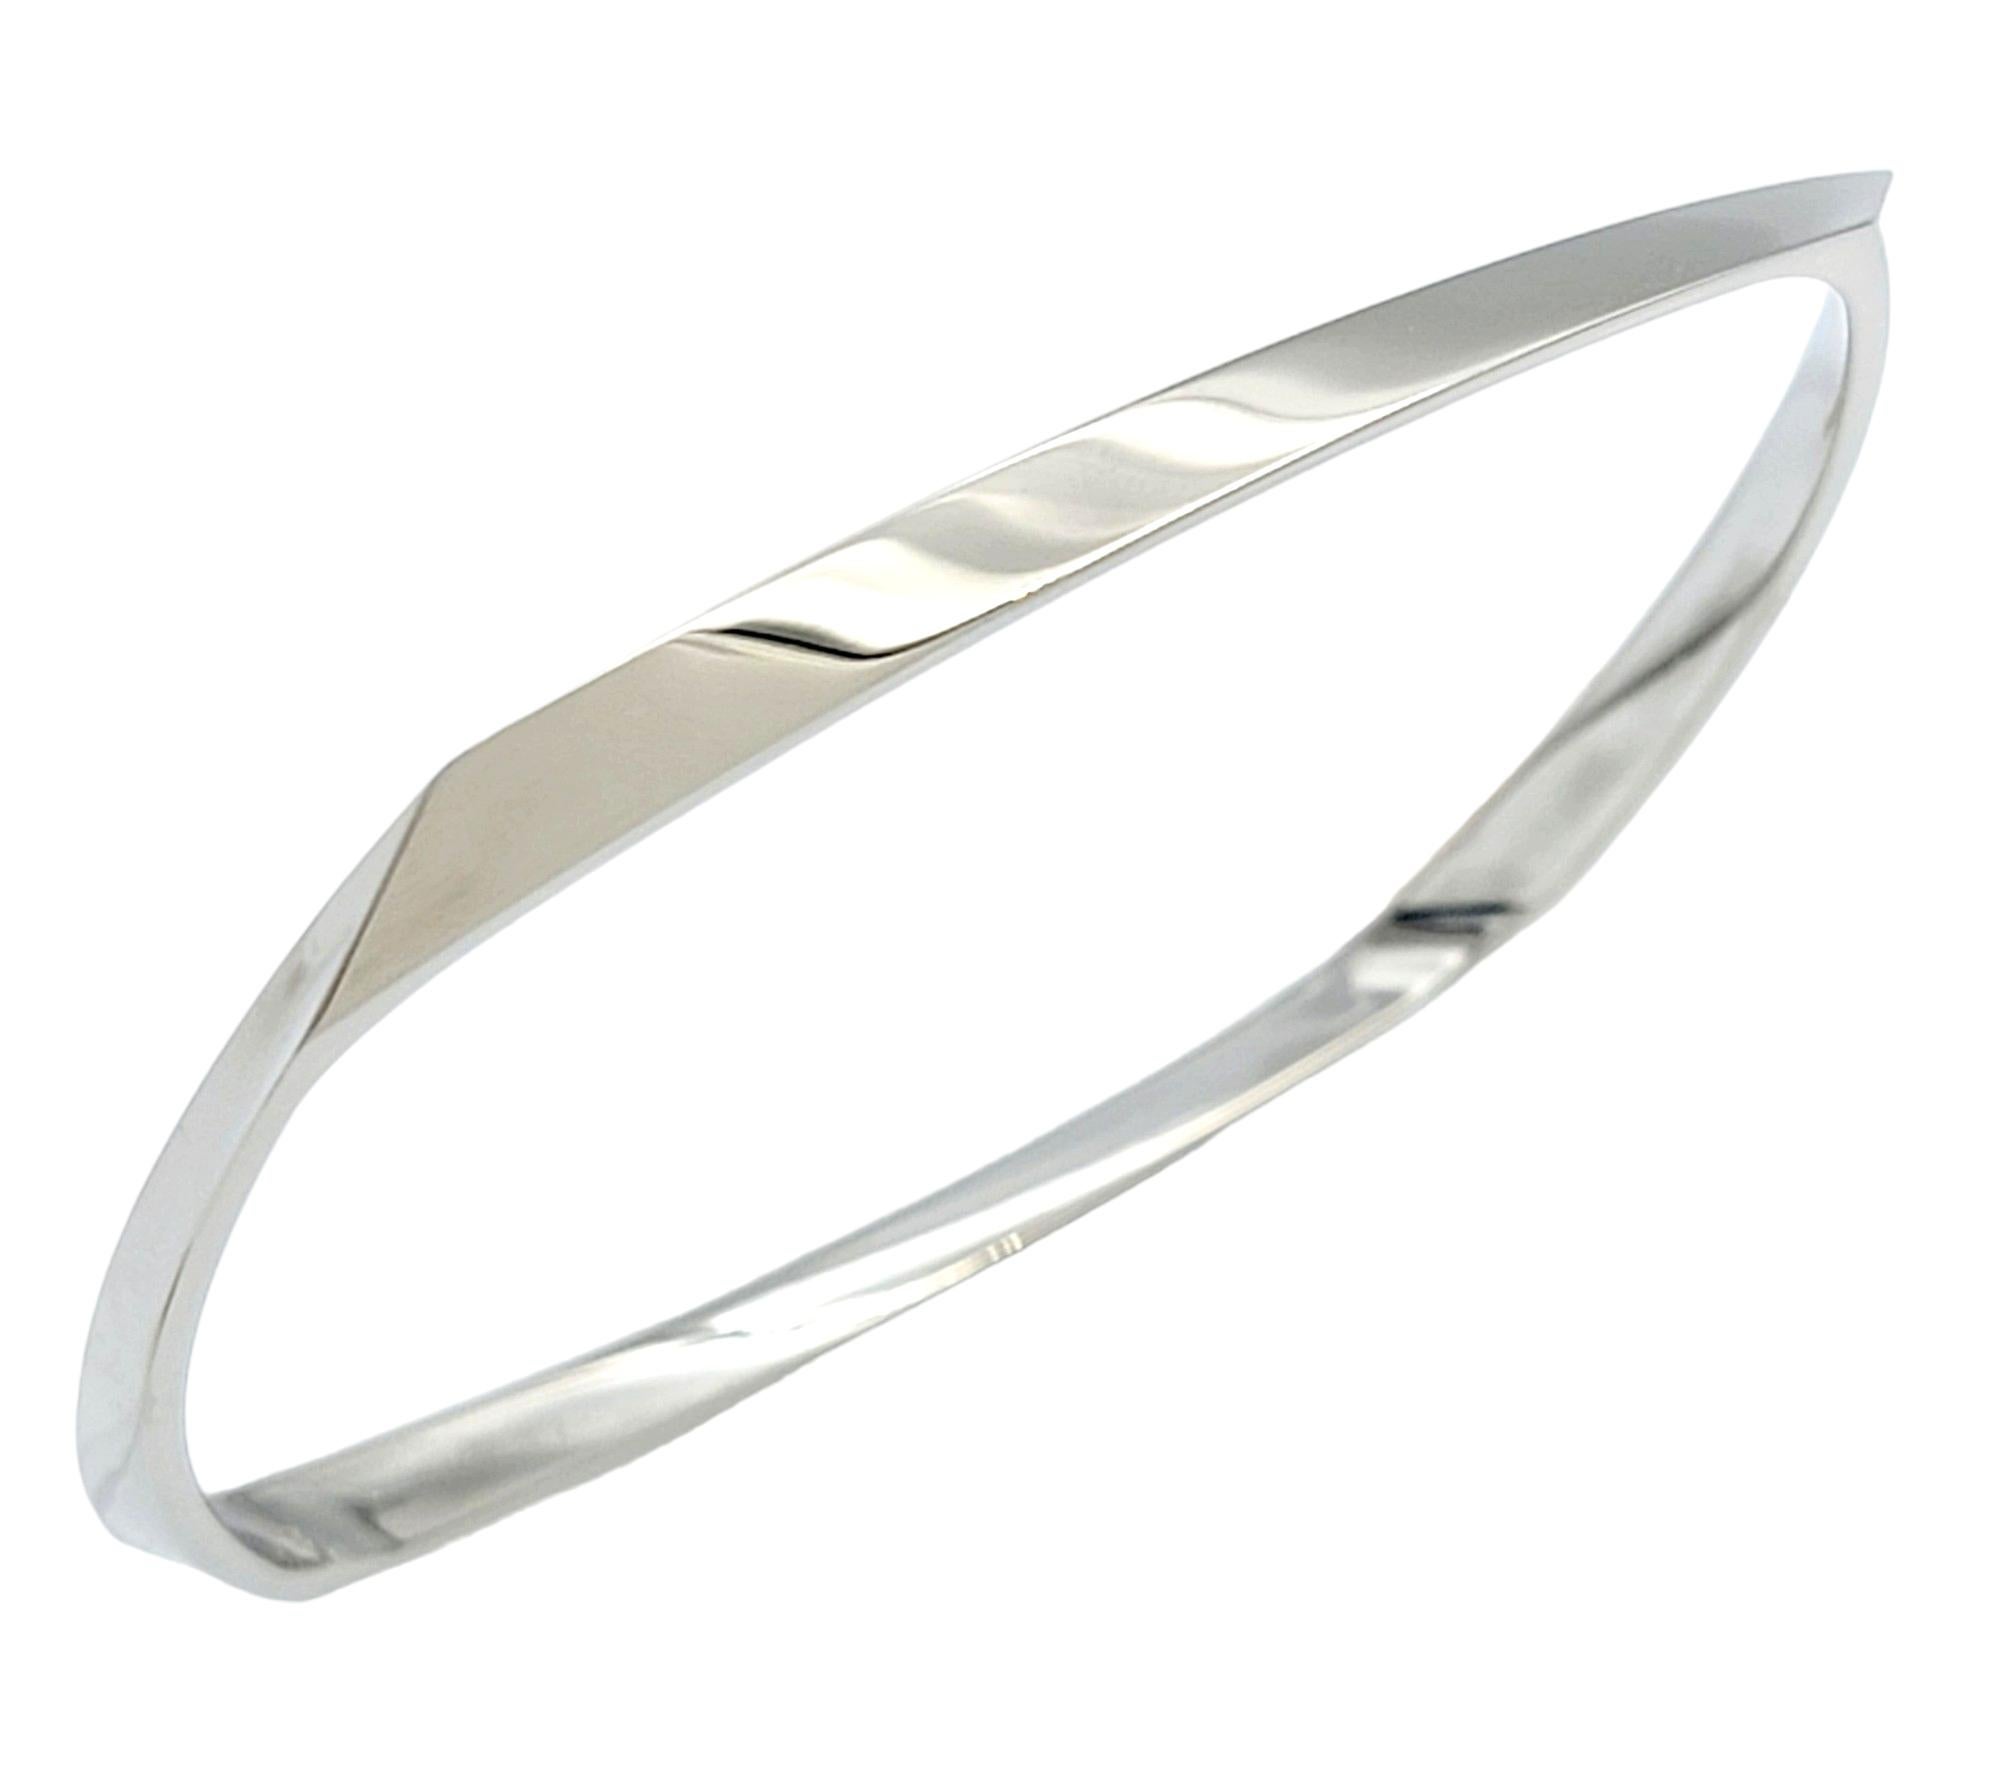 Frank Ghery for Tiffany & Co. Squared Twist Bangle Bracelet 18 Karat White Gold In Excellent Condition For Sale In Scottsdale, AZ